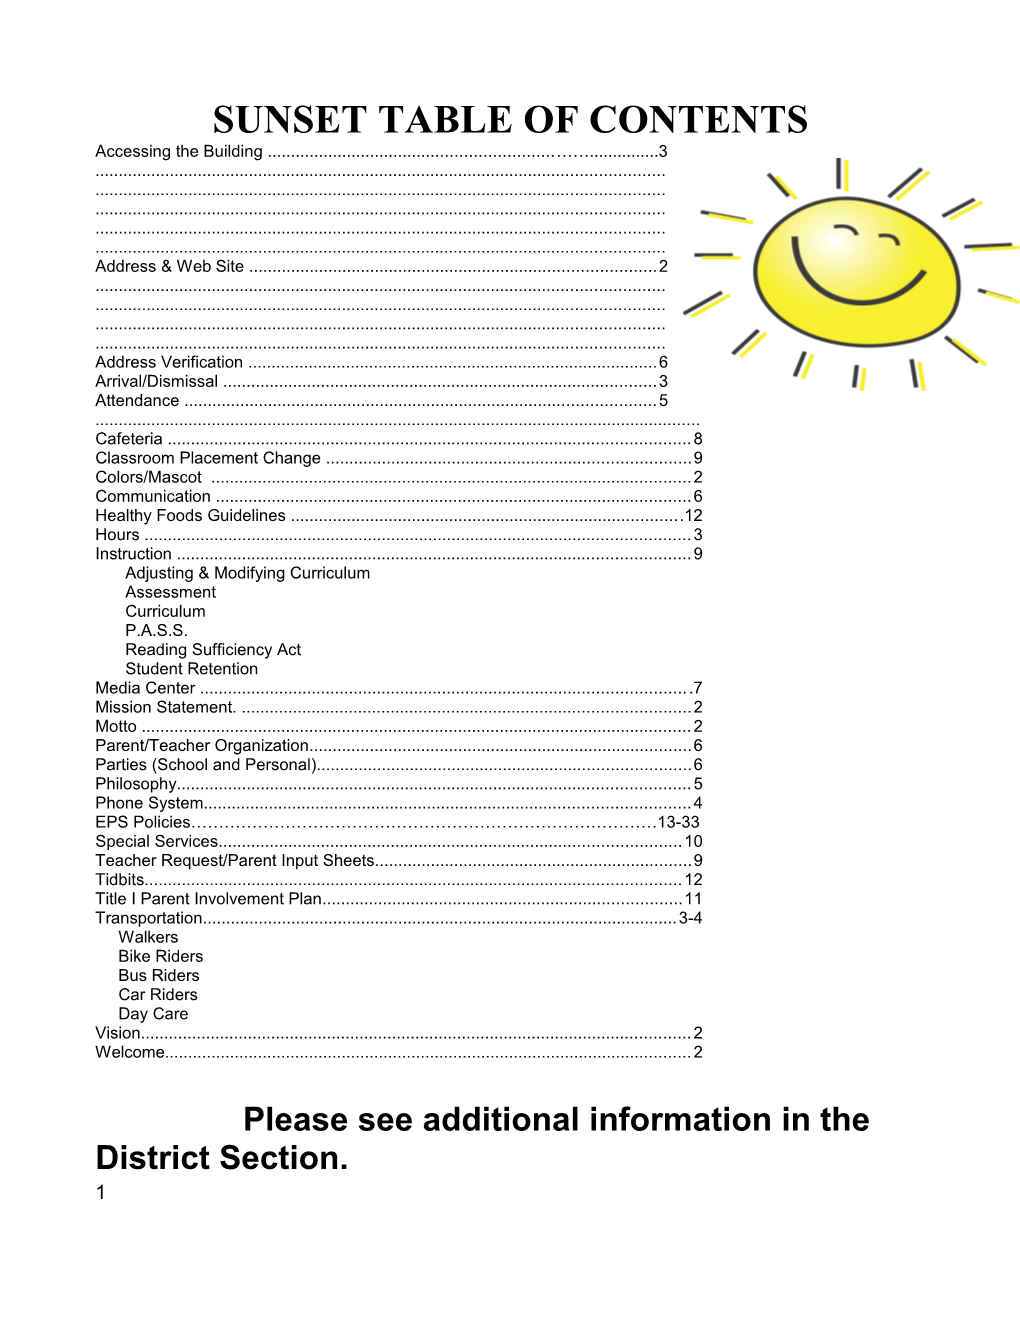 Sunset Table of Contents